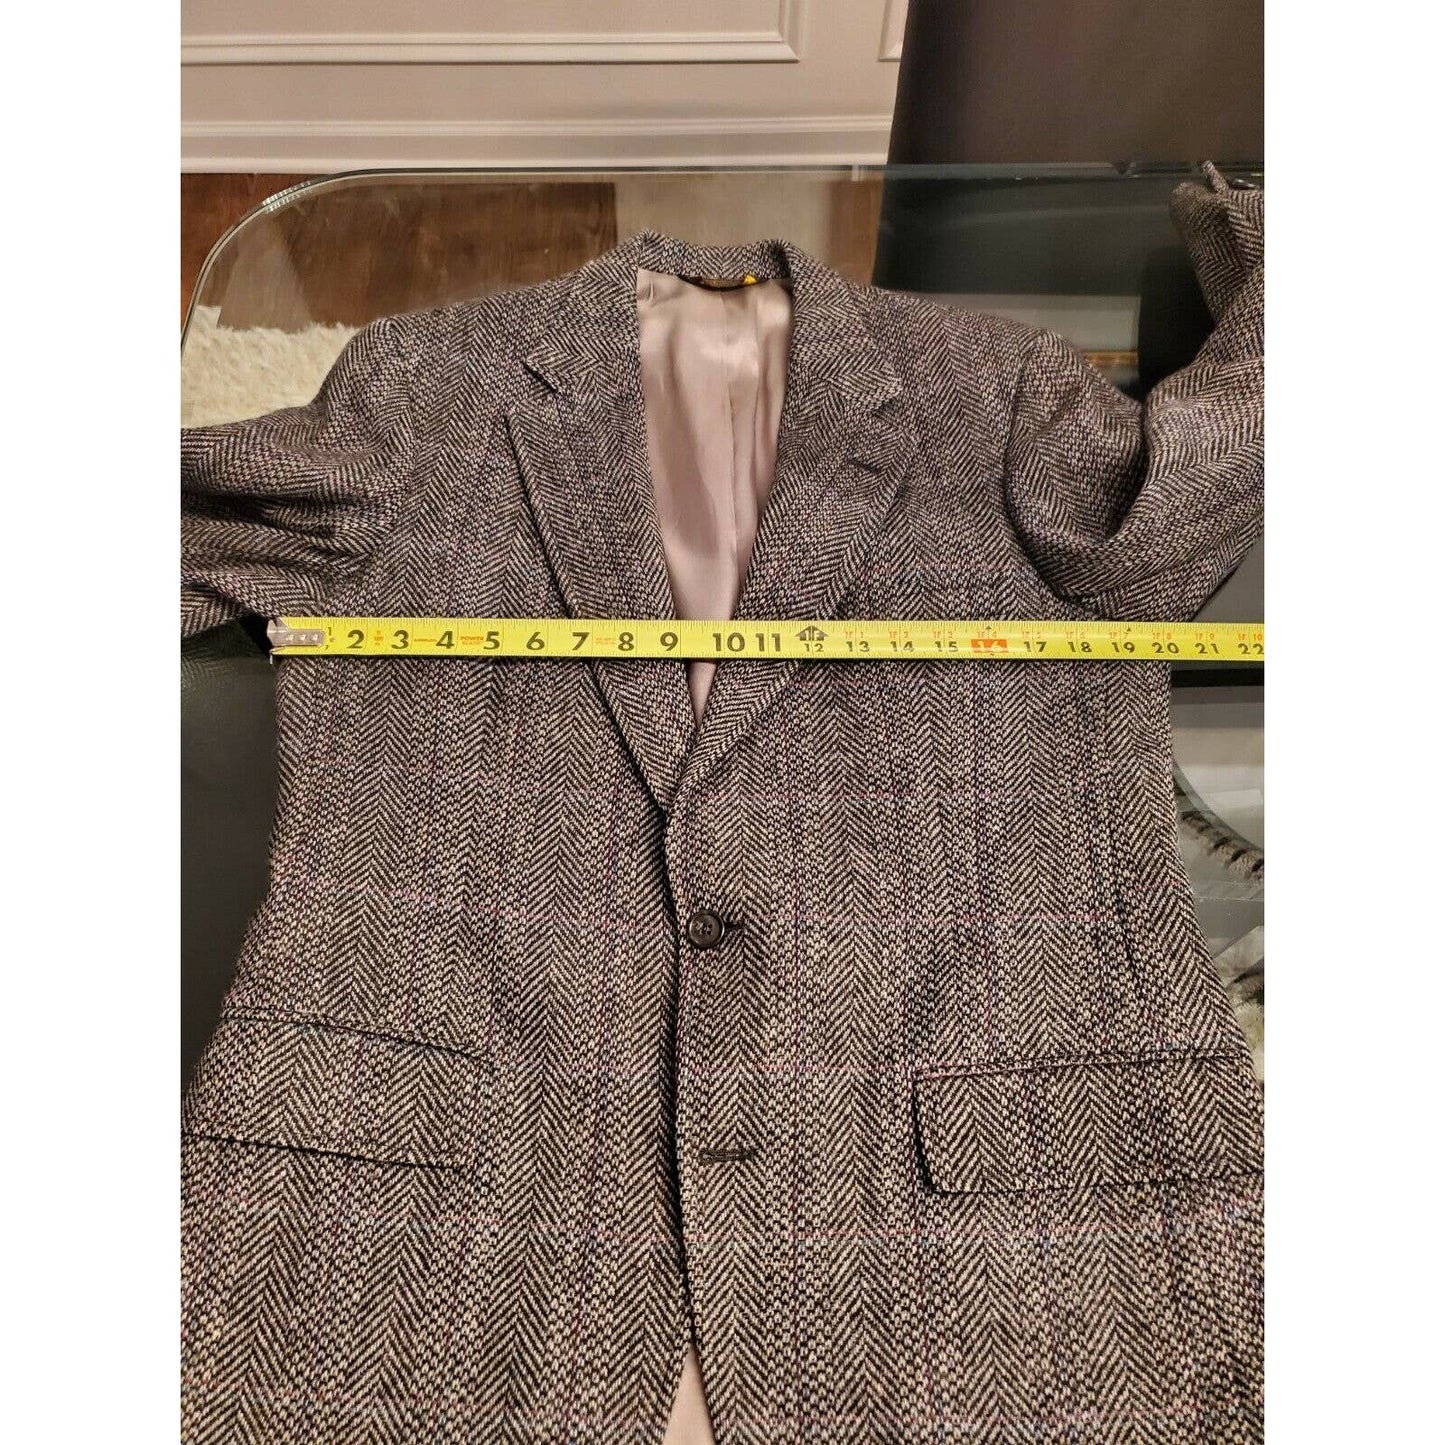 Barrister Men's Gray 100% Wool Single Breasted Long Sleeve Long Fitted Blazer